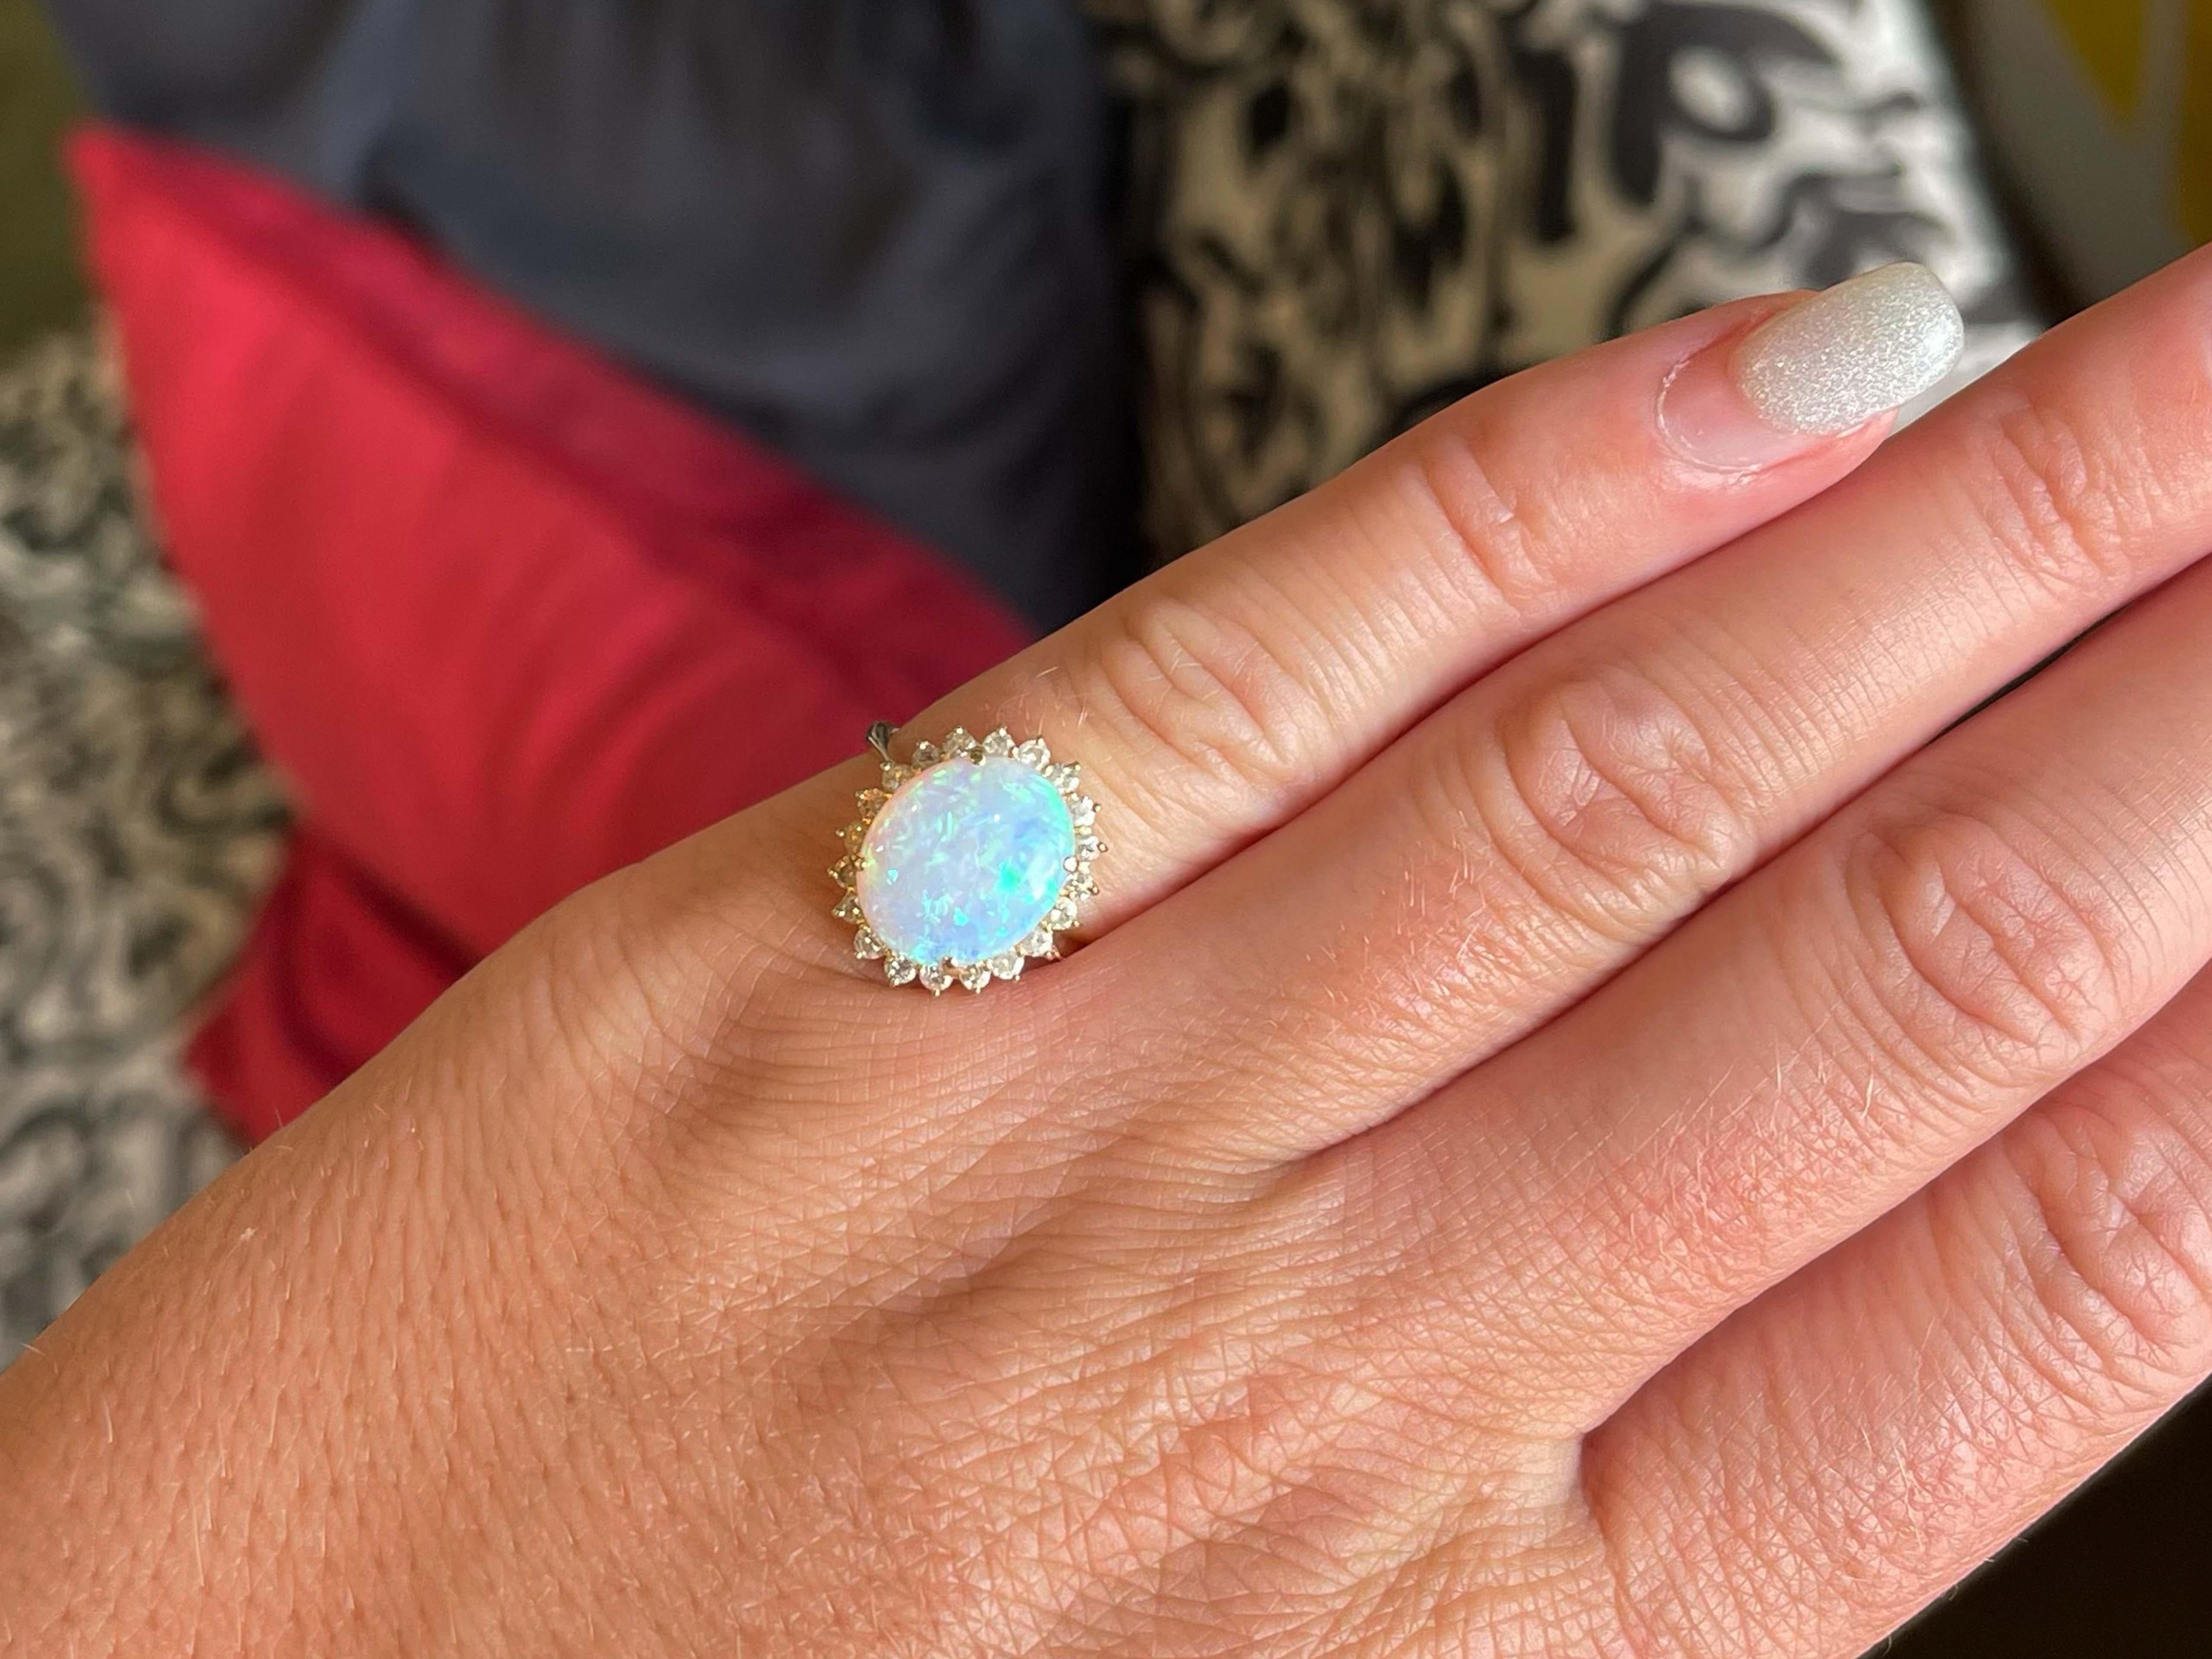 Item Specifications:

Metal: 14K Yellow Gold 

Total Weight: 3.3 Grams

Gemstone Specifications:

Center Gemstone: Opal

Gemstone Measurements: ~12.2 mm x 10.16 mm x 2.97 mm

Gemstone Carat Weight: ~2.09 carats

Diamond Count: 20

Diamond Color: